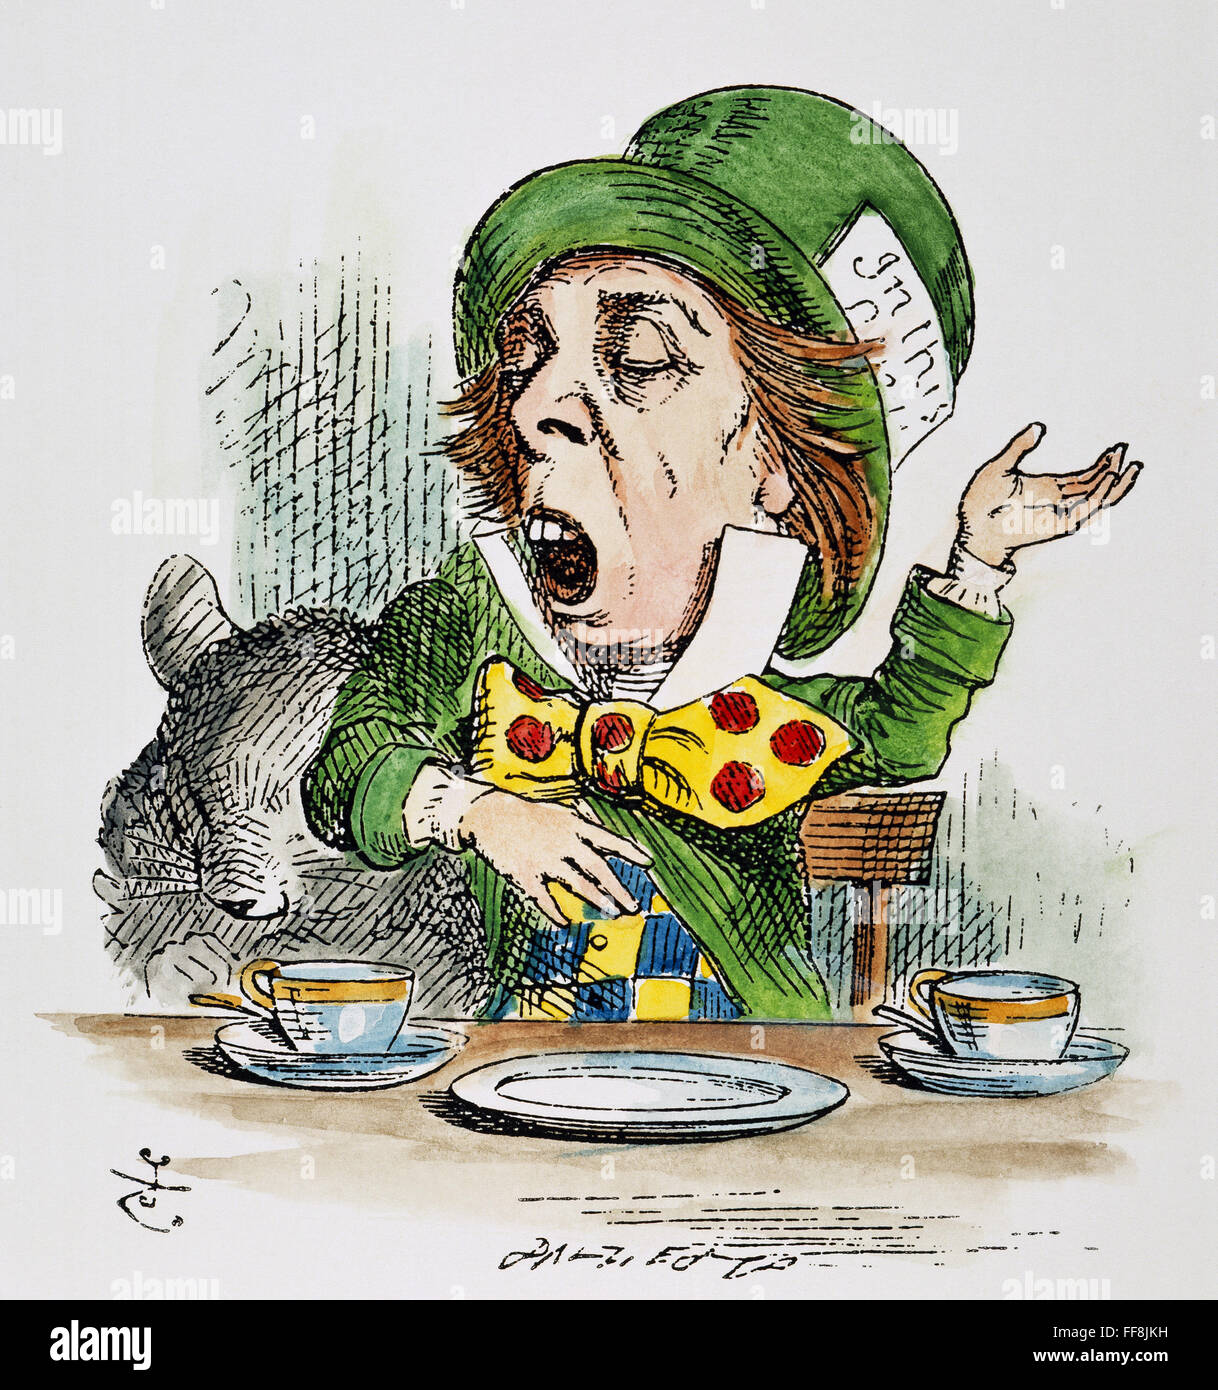 CARROLL: ALICE, 1865. /nThe Mad Tea Party. Illustration by John Tenniel from the first edition of Lewis Carroll's 'Alice's Adventures in Wonderland,' 1865. Stock Photo